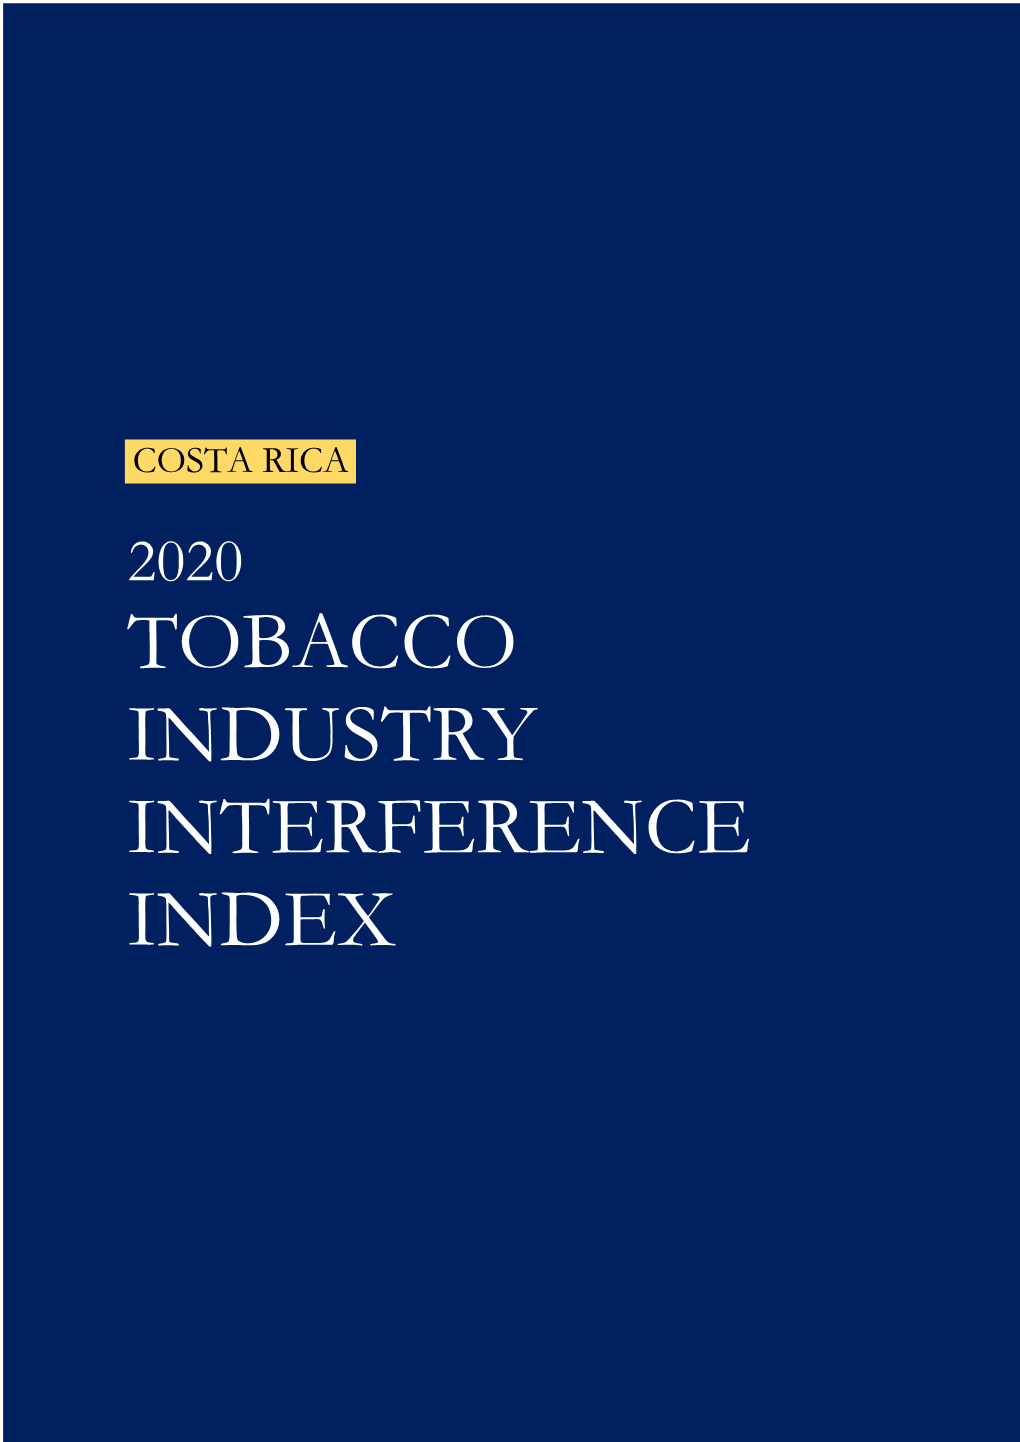 Costa Rica 2020 Tobacco Industry Interference Index